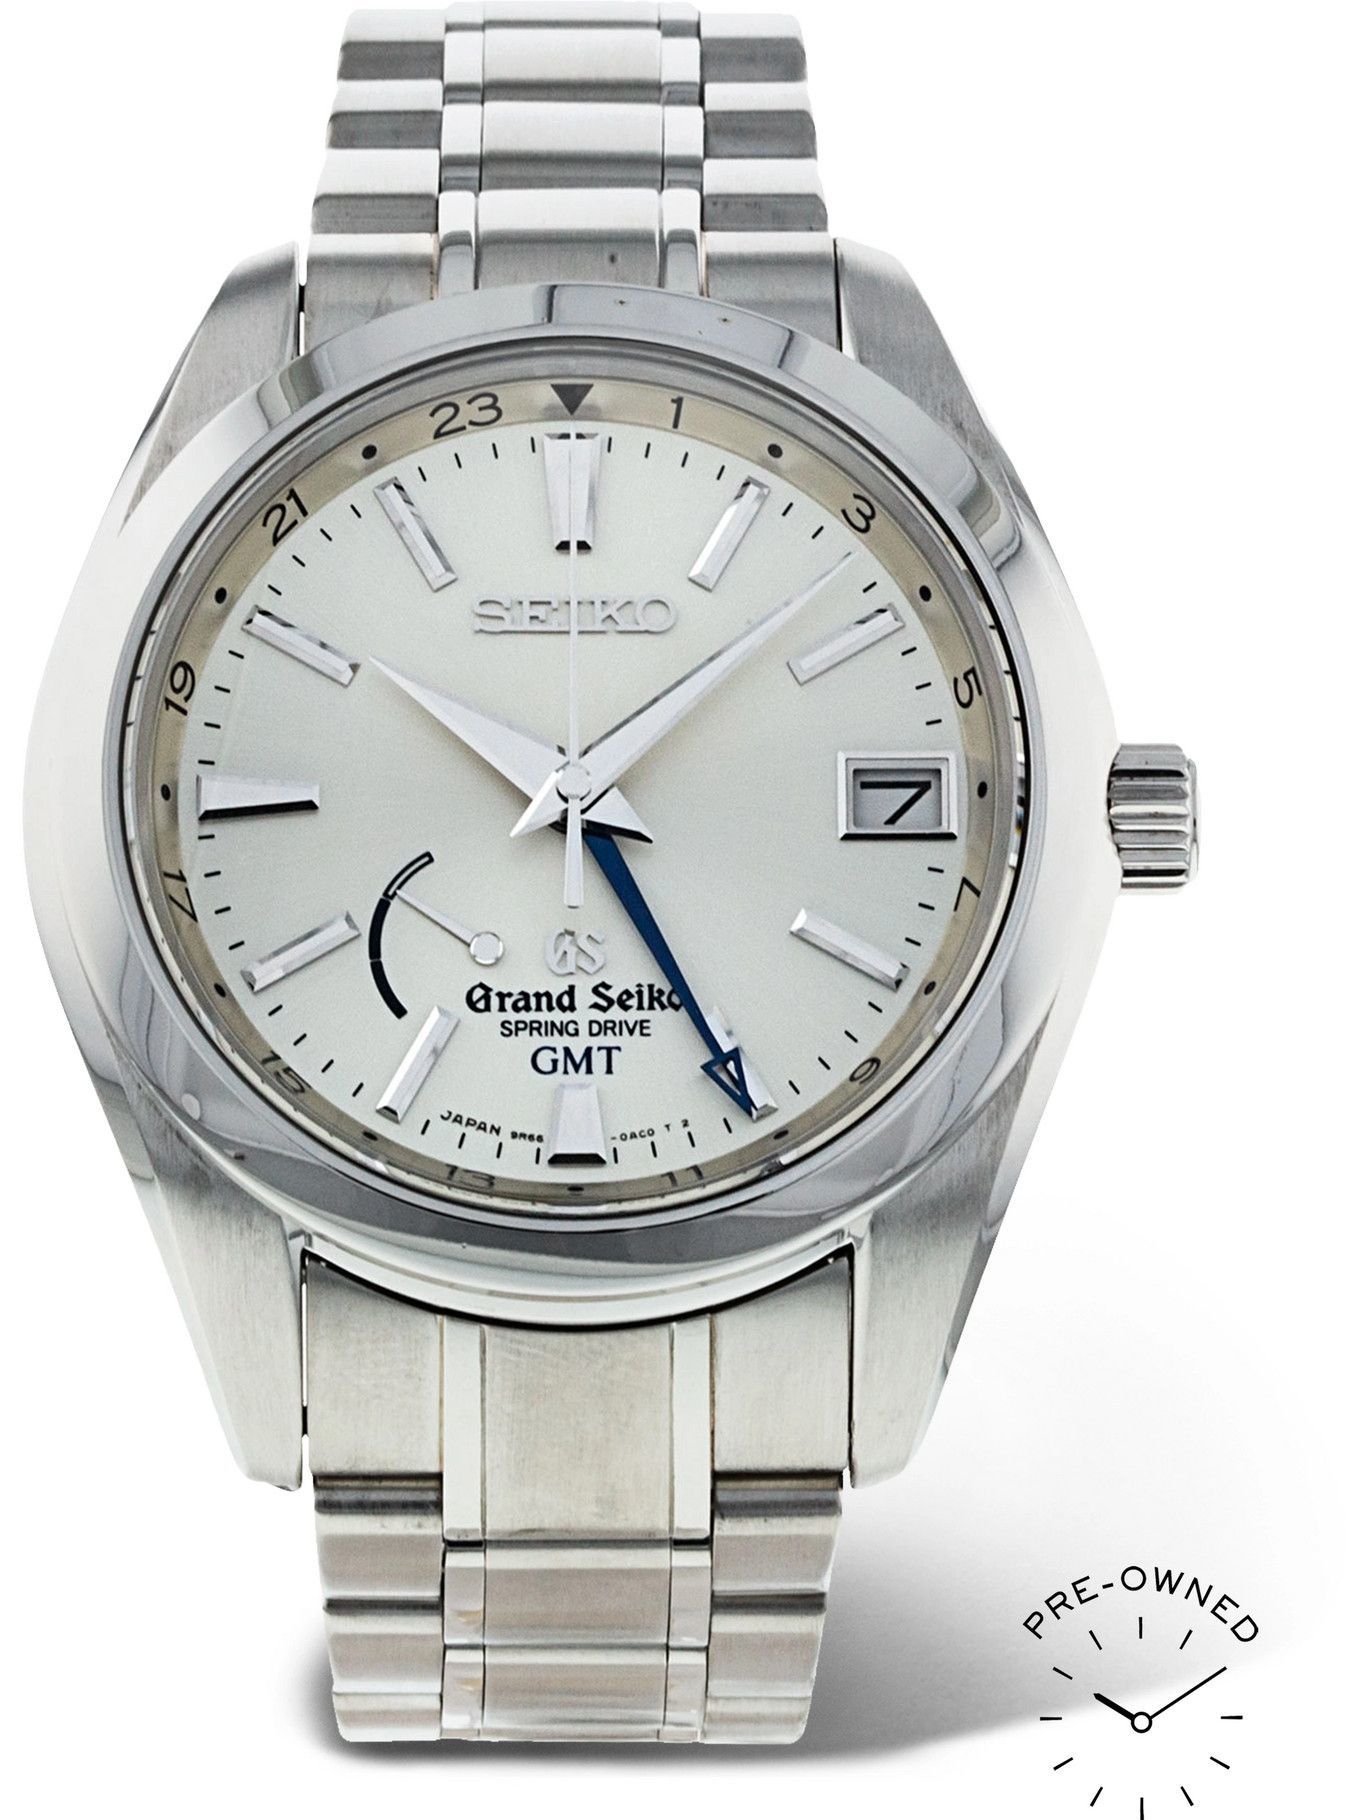 Grand Seiko - Pre-Owned 2014 Spring Drive GMT Automatic 39mm Stainless  Steel Watch, Ref. No. SBGE005 Grand Seiko